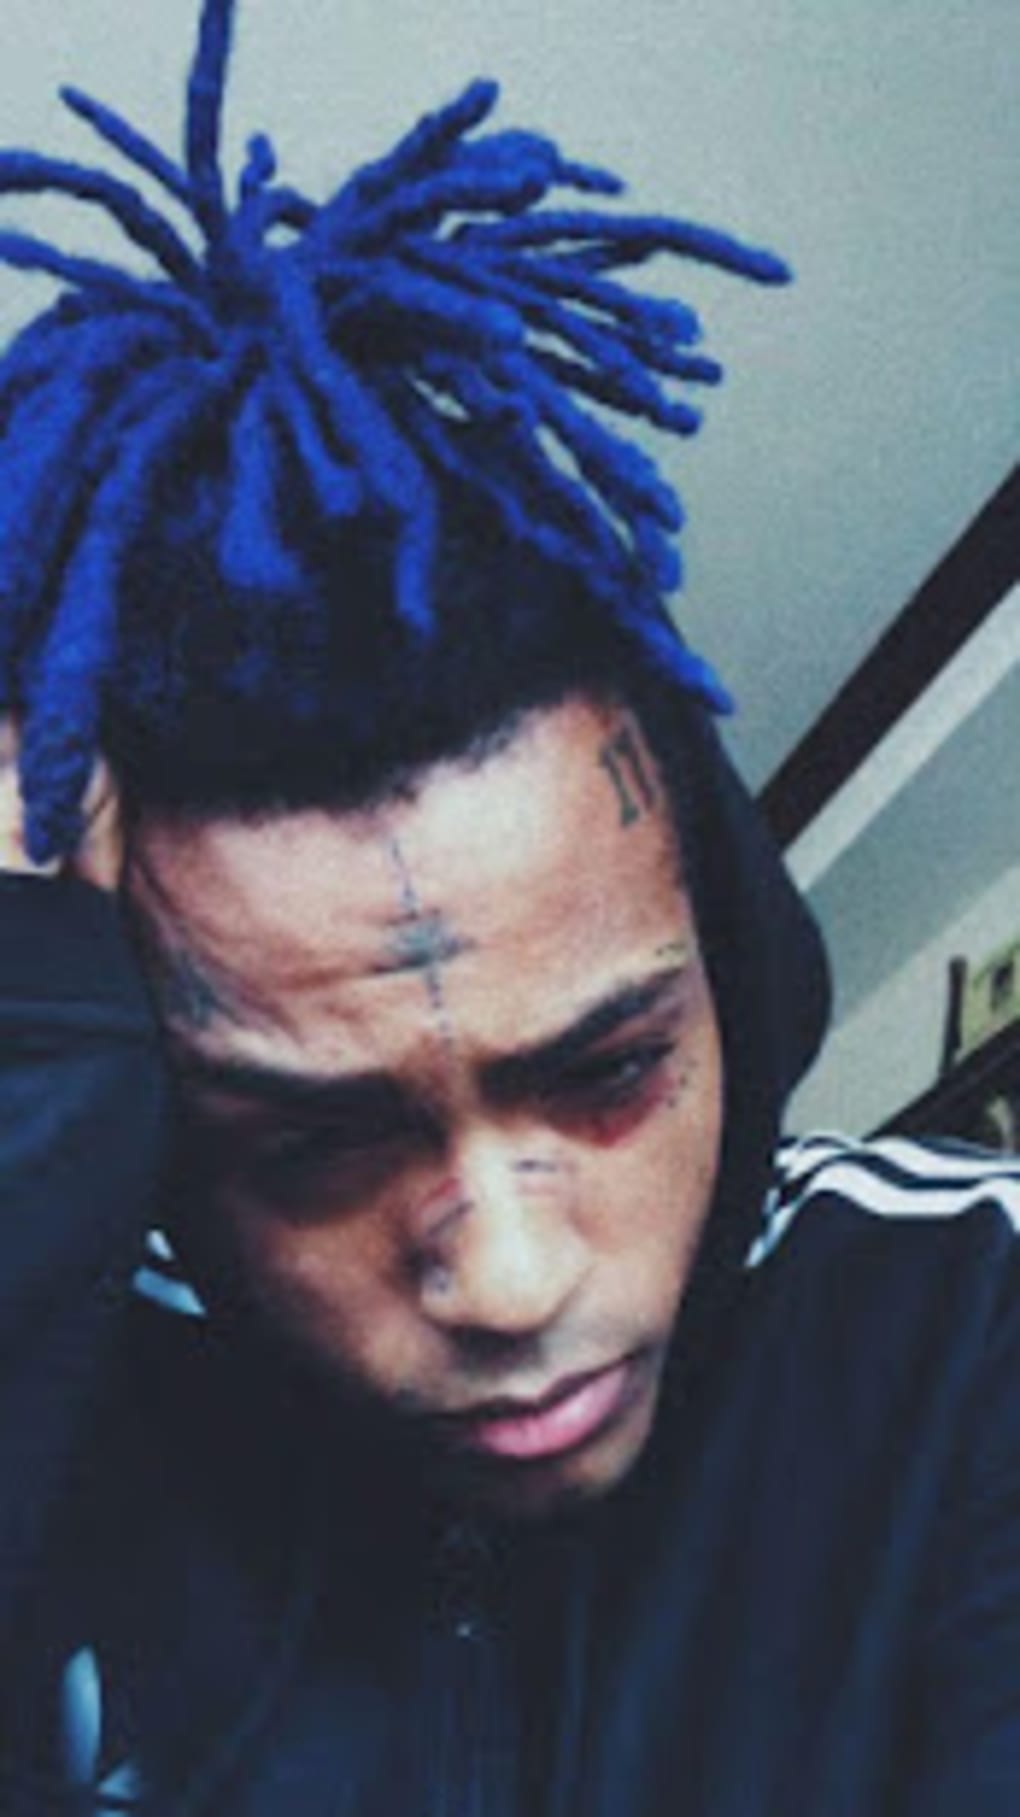 Free download XXXTentacion Wallpaper for Android Download [1020x1817] for your Desktop, Mobile & Tablet. Explore XXXTentacion Latest Wallpaper. XXXTentacion Latest Wallpaper, XXXTENTACION Bad Wallpaper, XXXTentacion Red Wallpaper